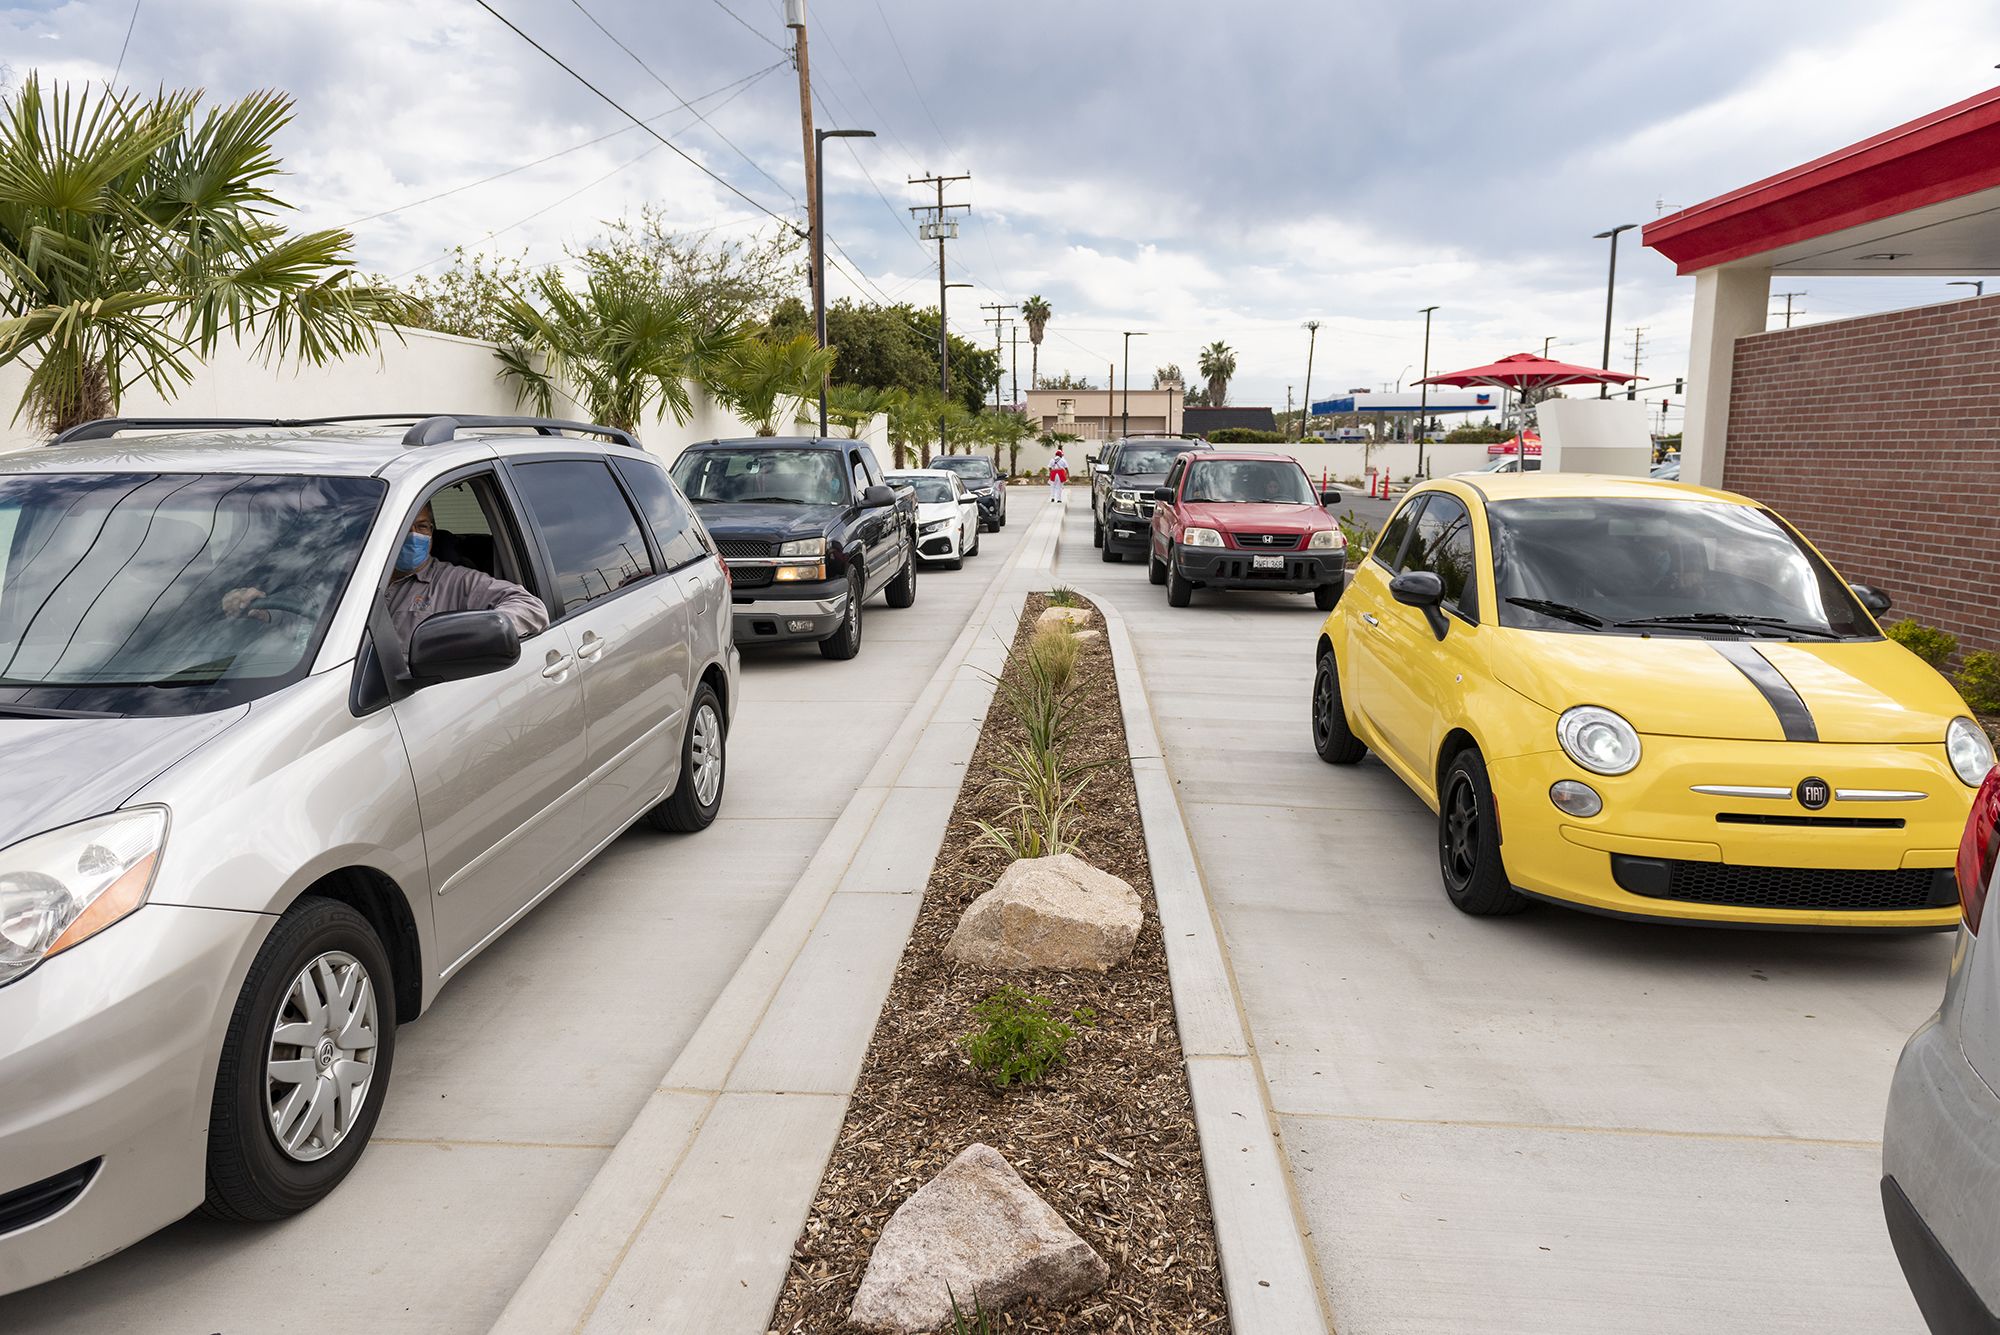 Golden considering whether to impose a limit on drive-thru lanes